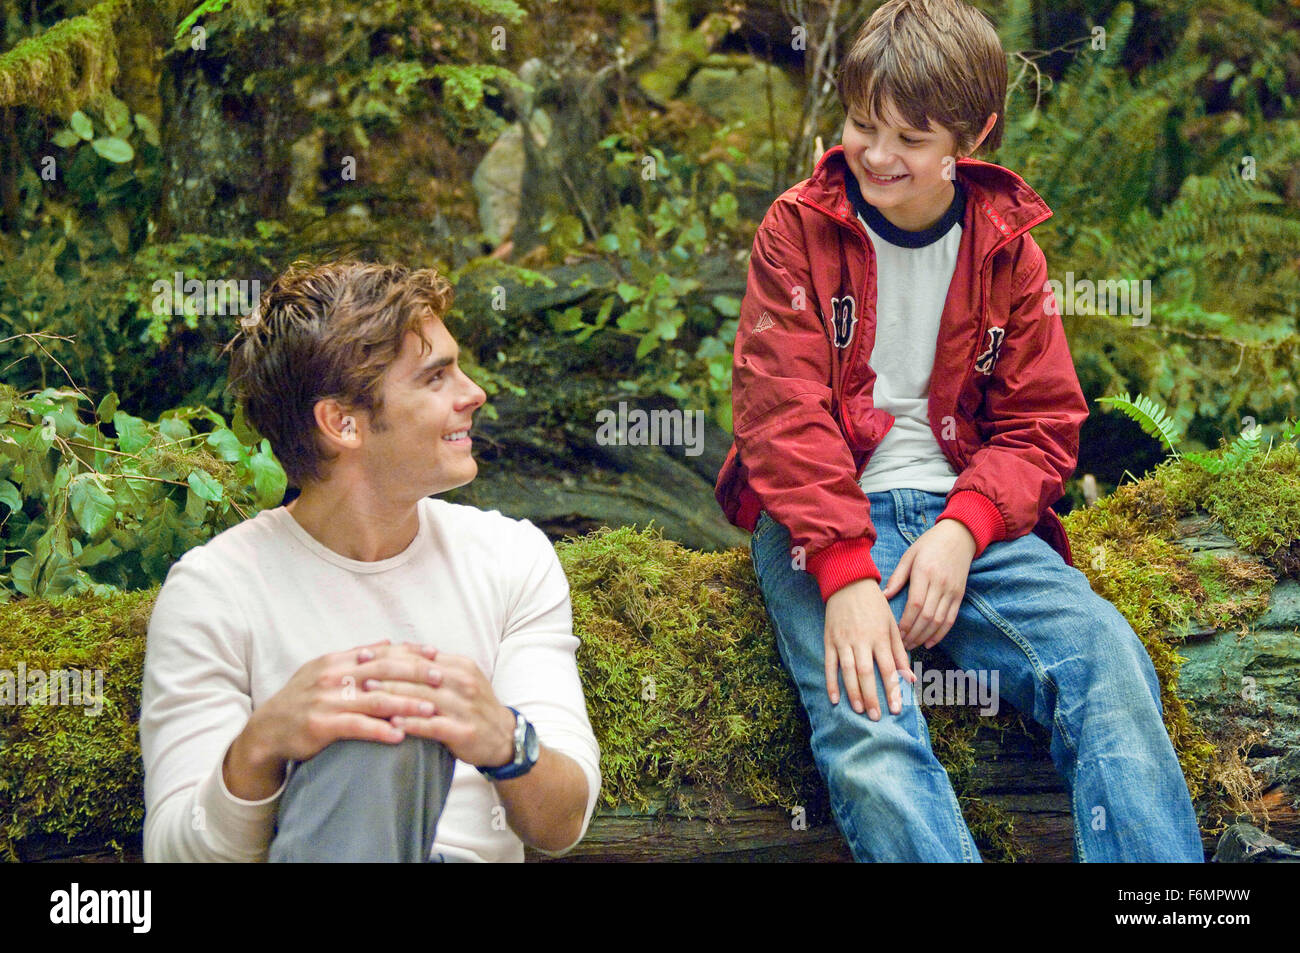 RELEASE DATE: July 30, 2010. MOVIE TITLE: Charlie St. Cloud aka The Death and Life of Charlie St. Cloud. STUDIO: Universal Pictures. PLOT: Charlie St. Cloud is a young man overcome by grief at the death of his younger brother. So much so that he takes a job as caretaker of the cemetery in which his brother is buried. Charlie has a special lasting bond with his brother though, as he can see him. Charlie meets up with his brother (Sam) each night to play catch and talk. Then, a girl comes into Charlie's life and he must choose between keeping a promise he made to Sam, or going after the girl he Stock Photo